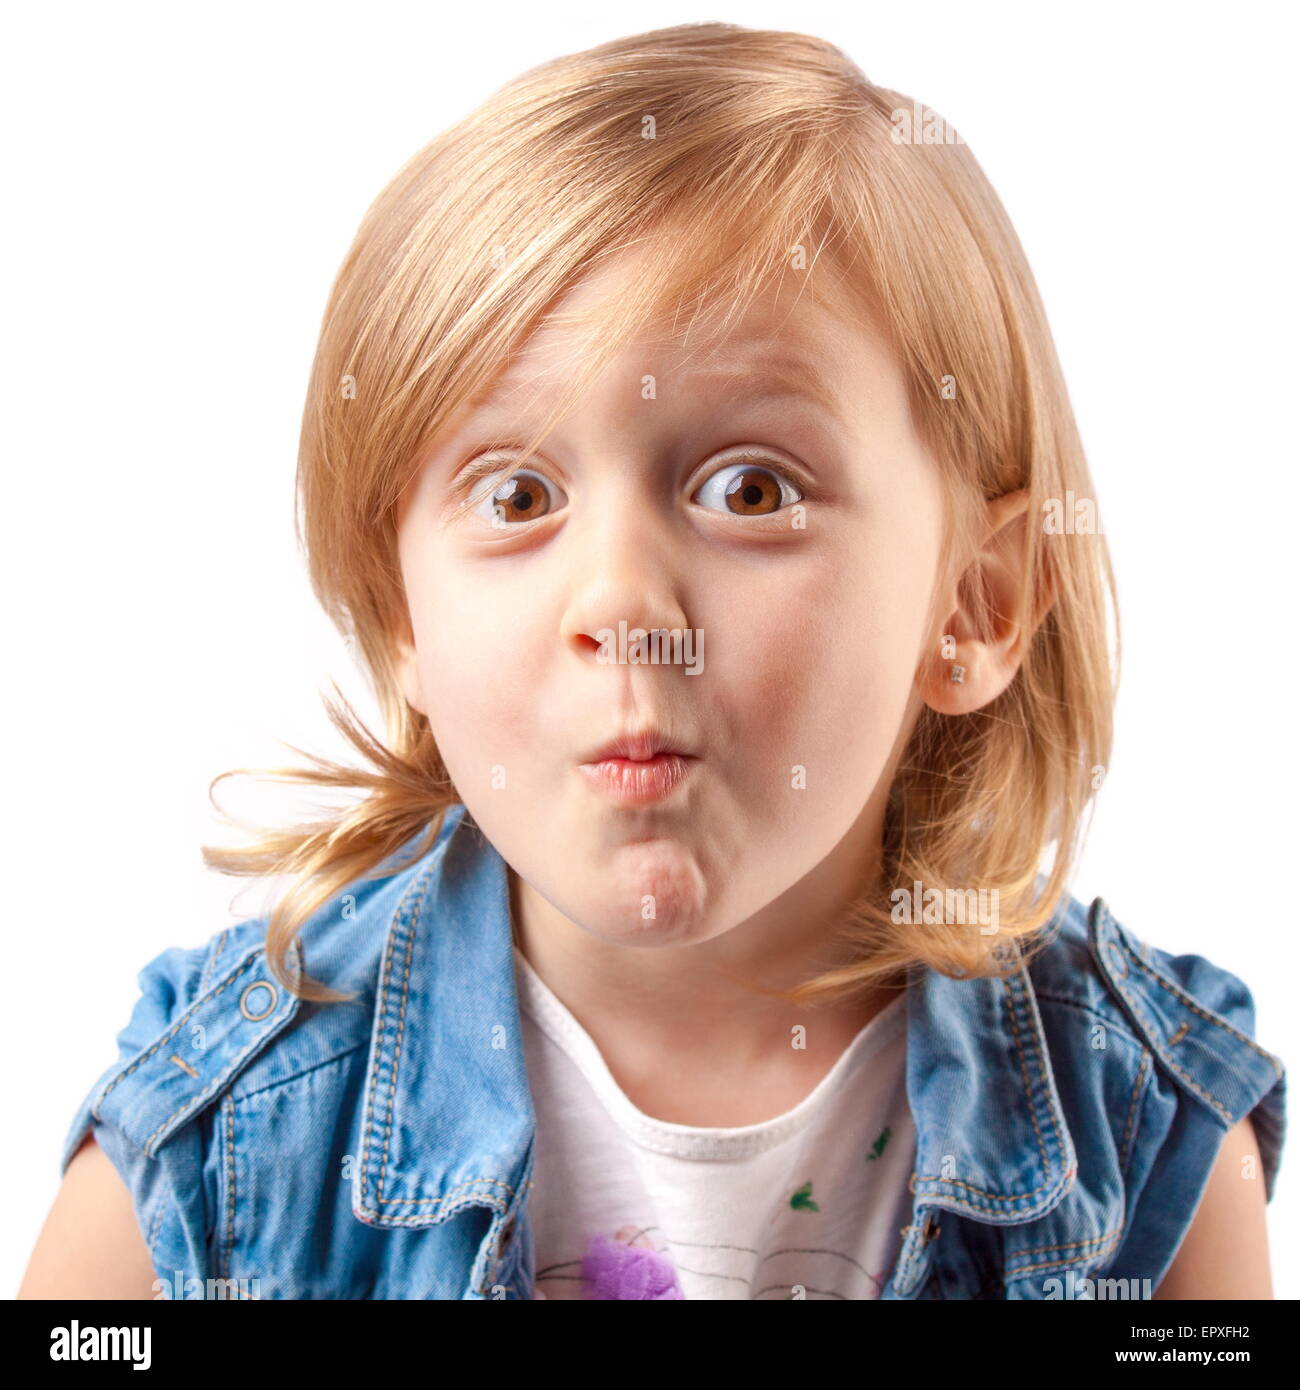 Little cute girl making grimace and having fun Stock Photo